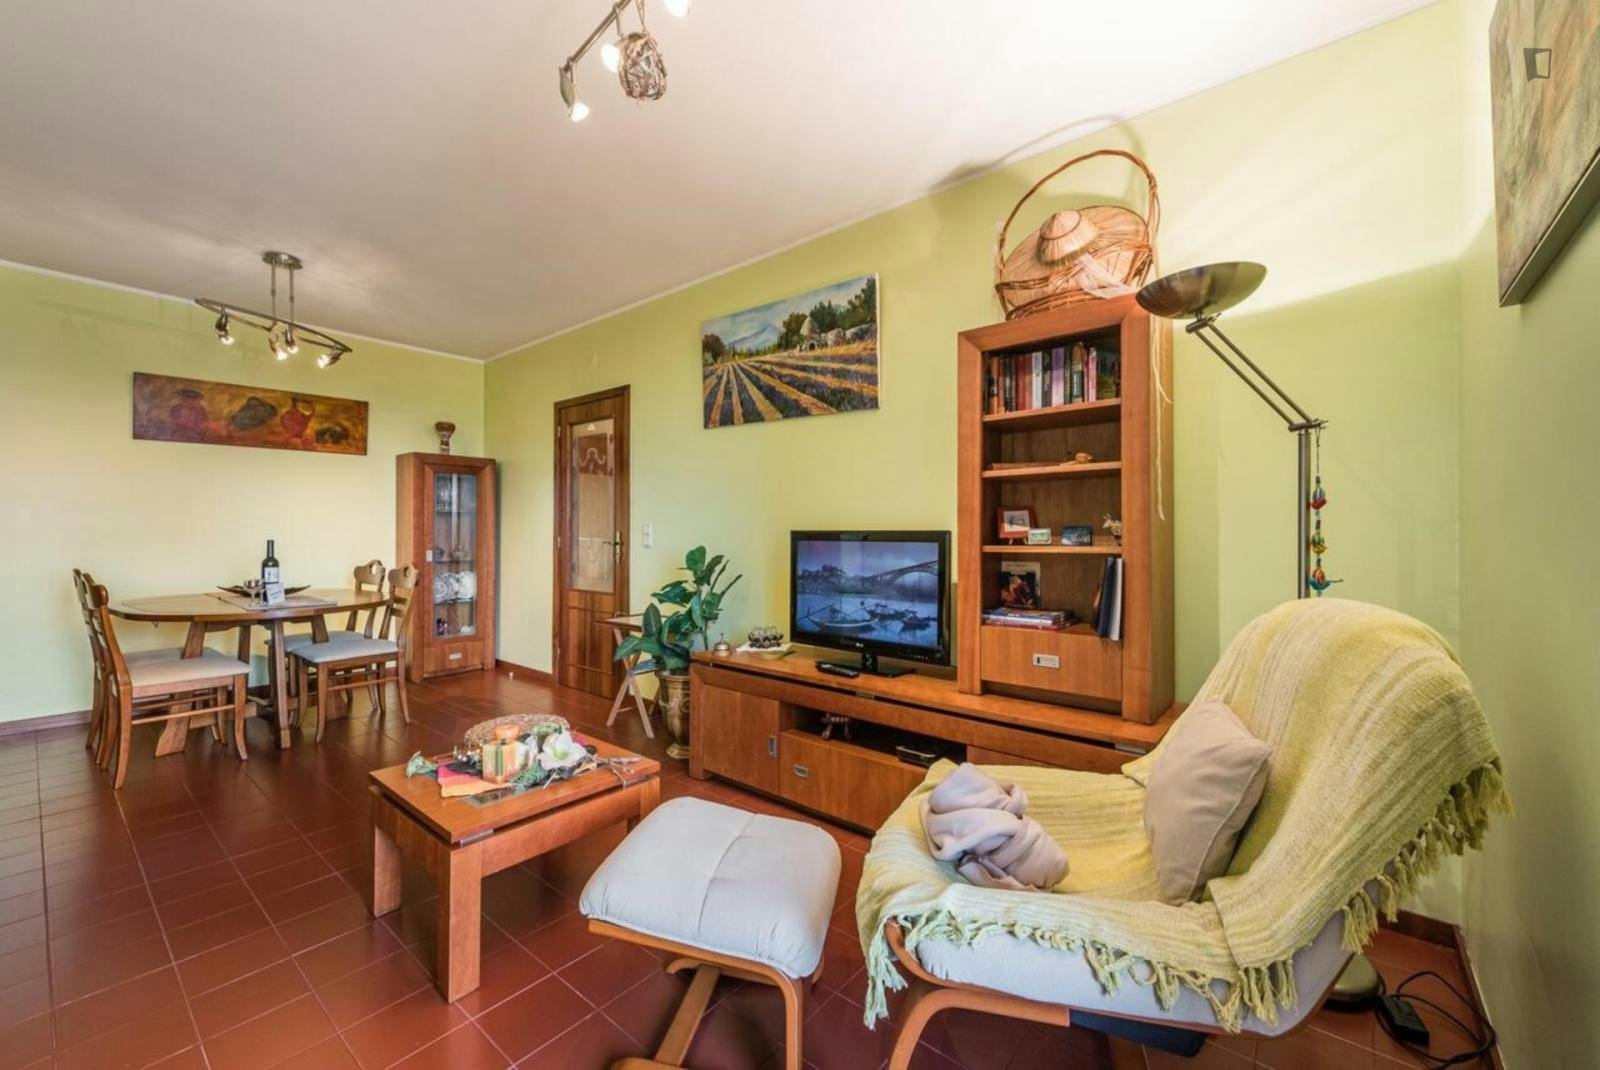 Amazing flat next to Coimbrões train station